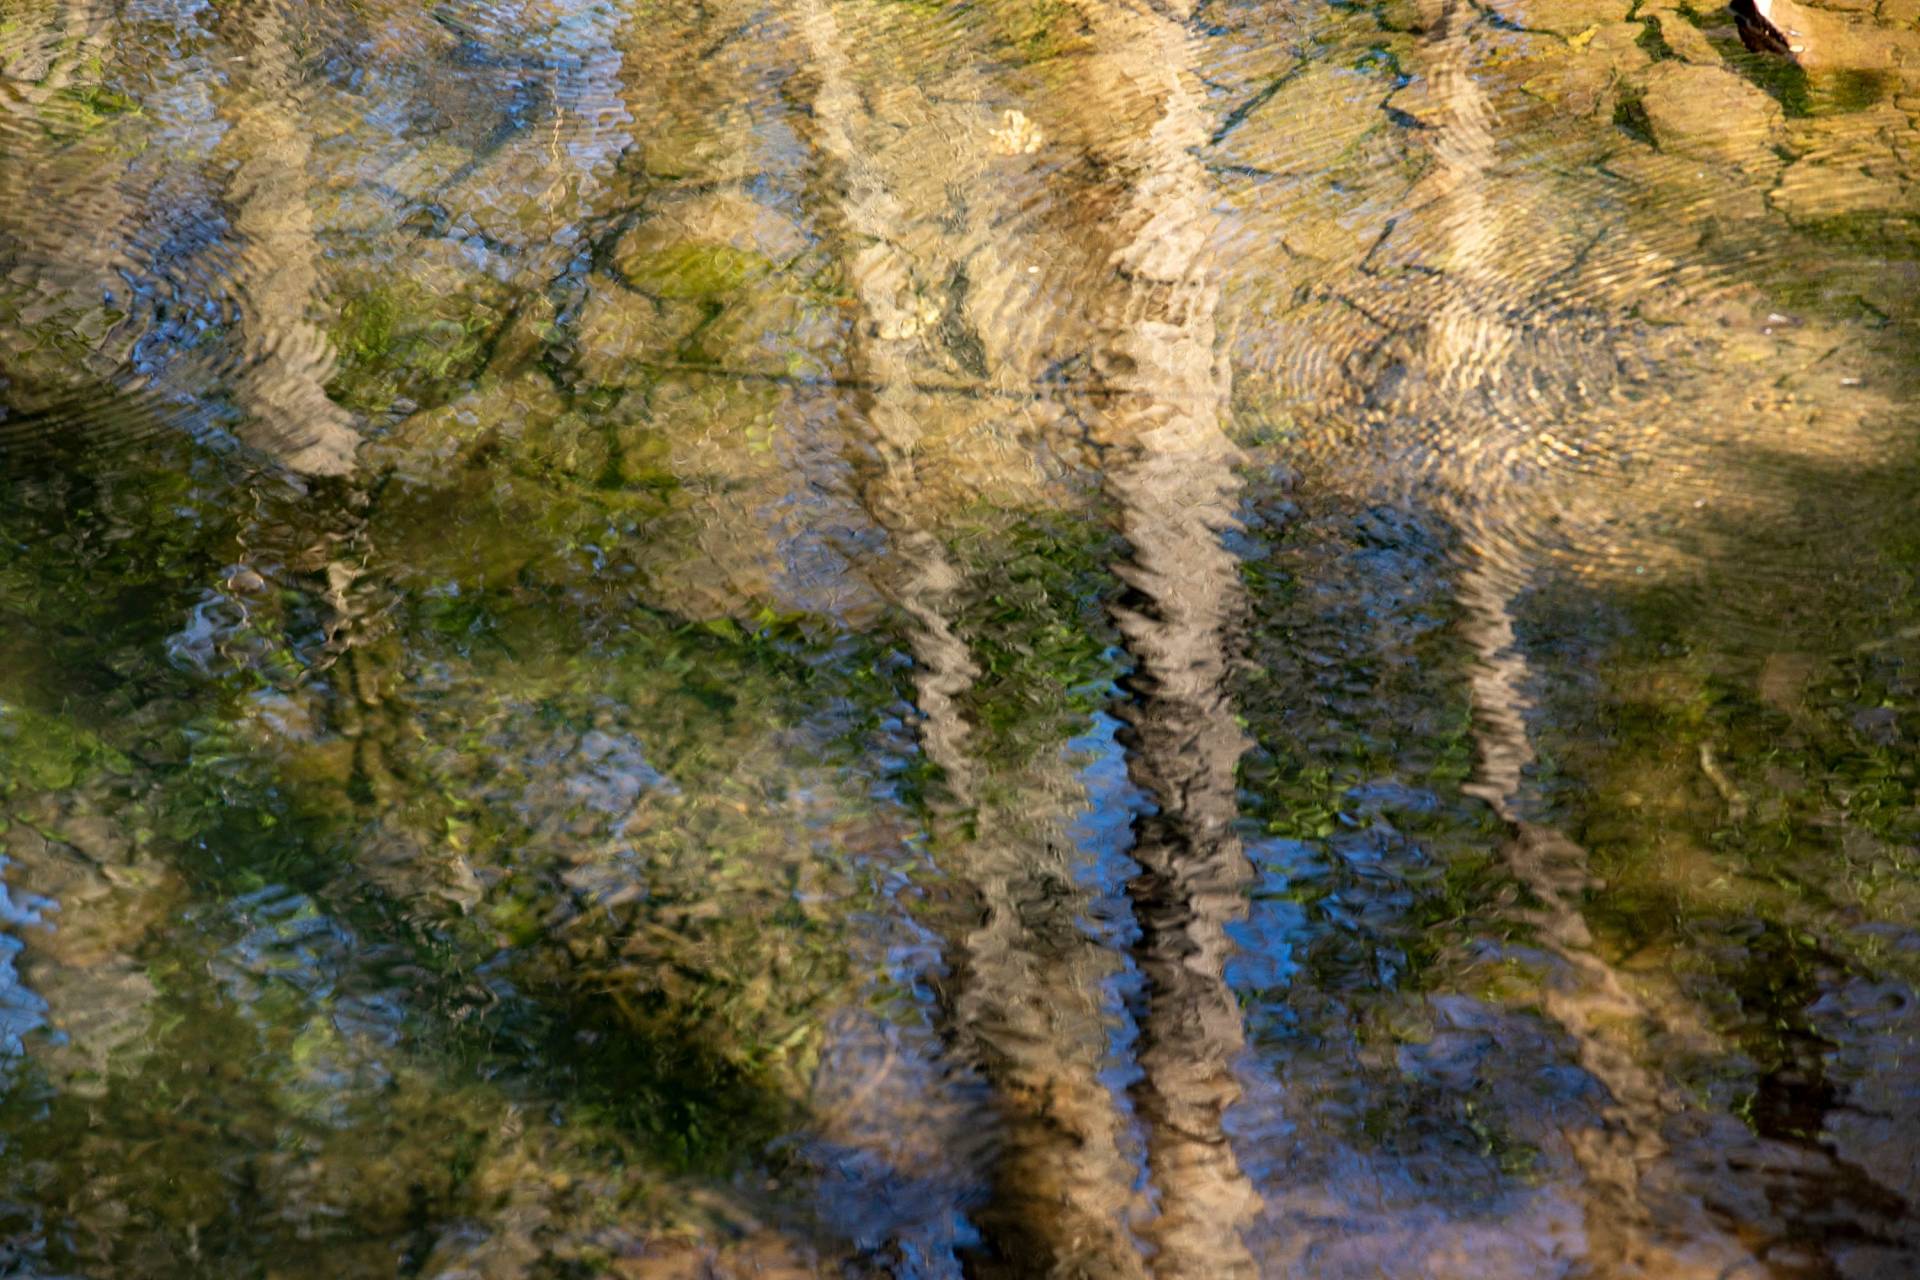 Refections of trees in rippling water